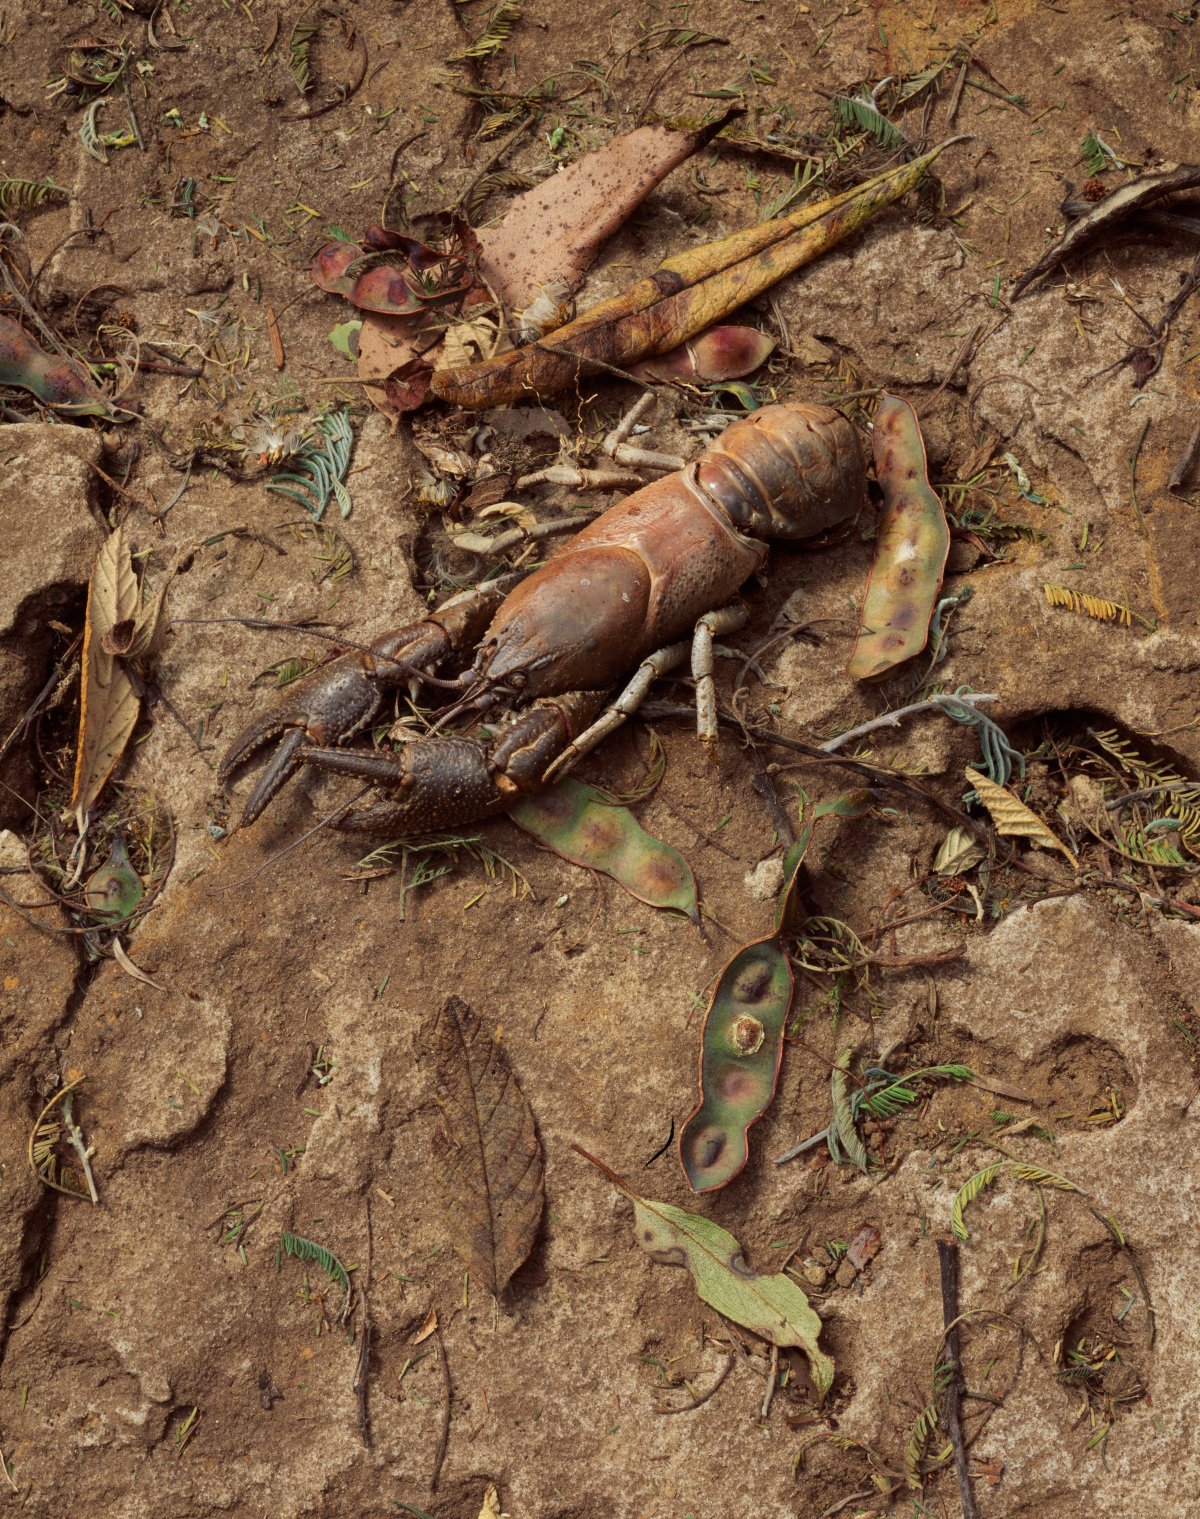 A brown yabbie sits among a pile of a dead leaves on a dirty muddy bank.